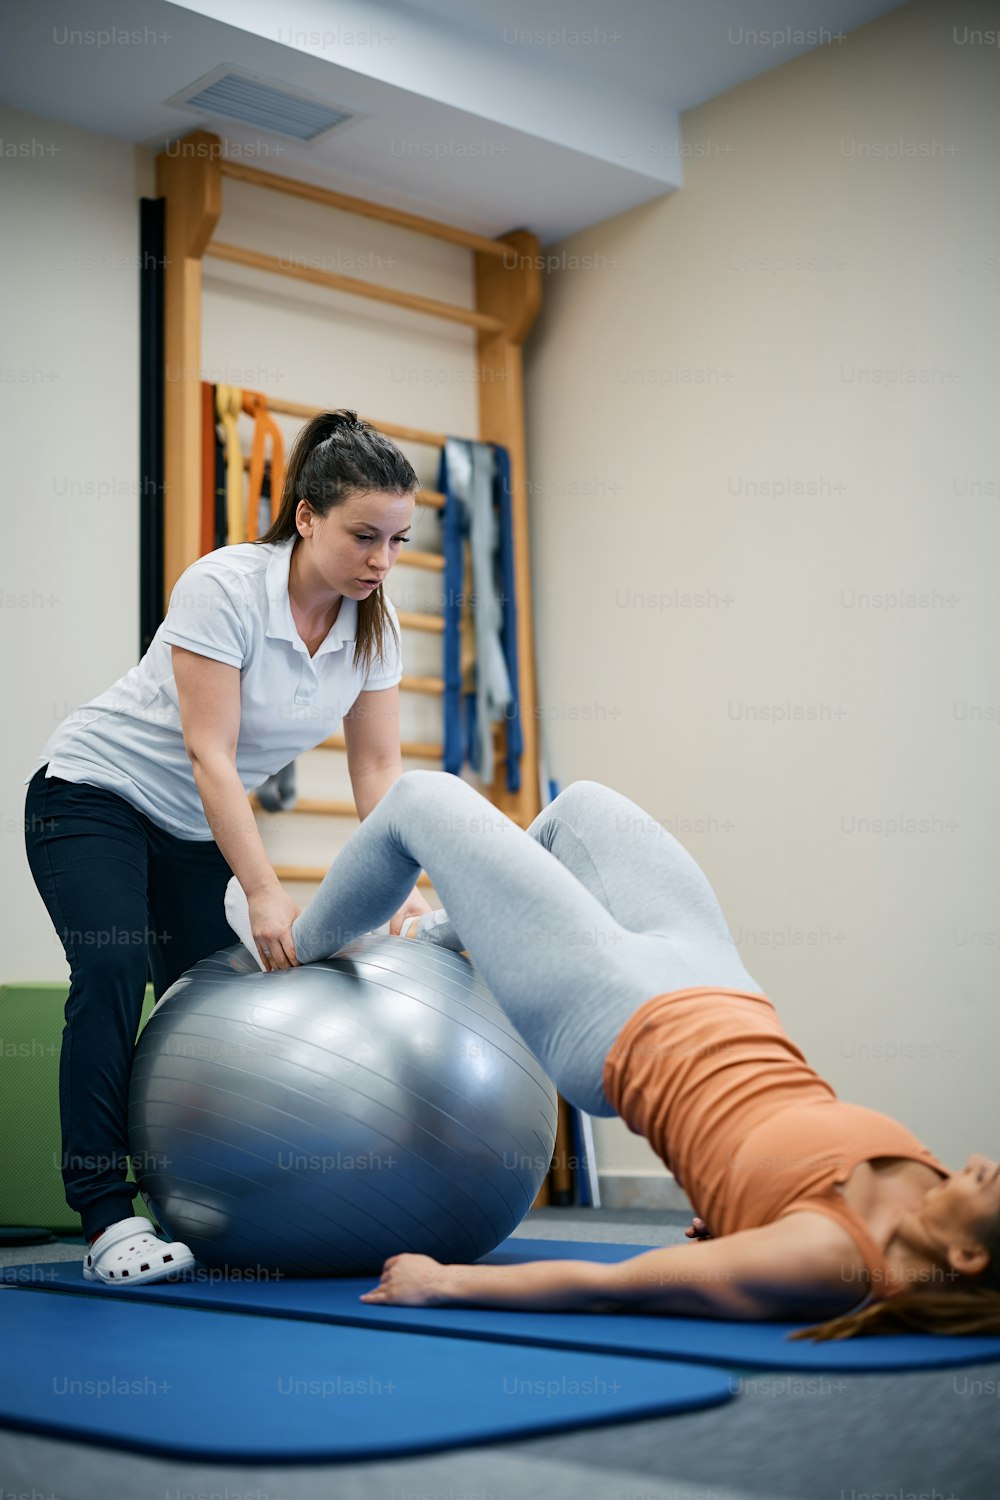 Physical therapist using fitness ball during therapeutic treatment with female patient at health club.